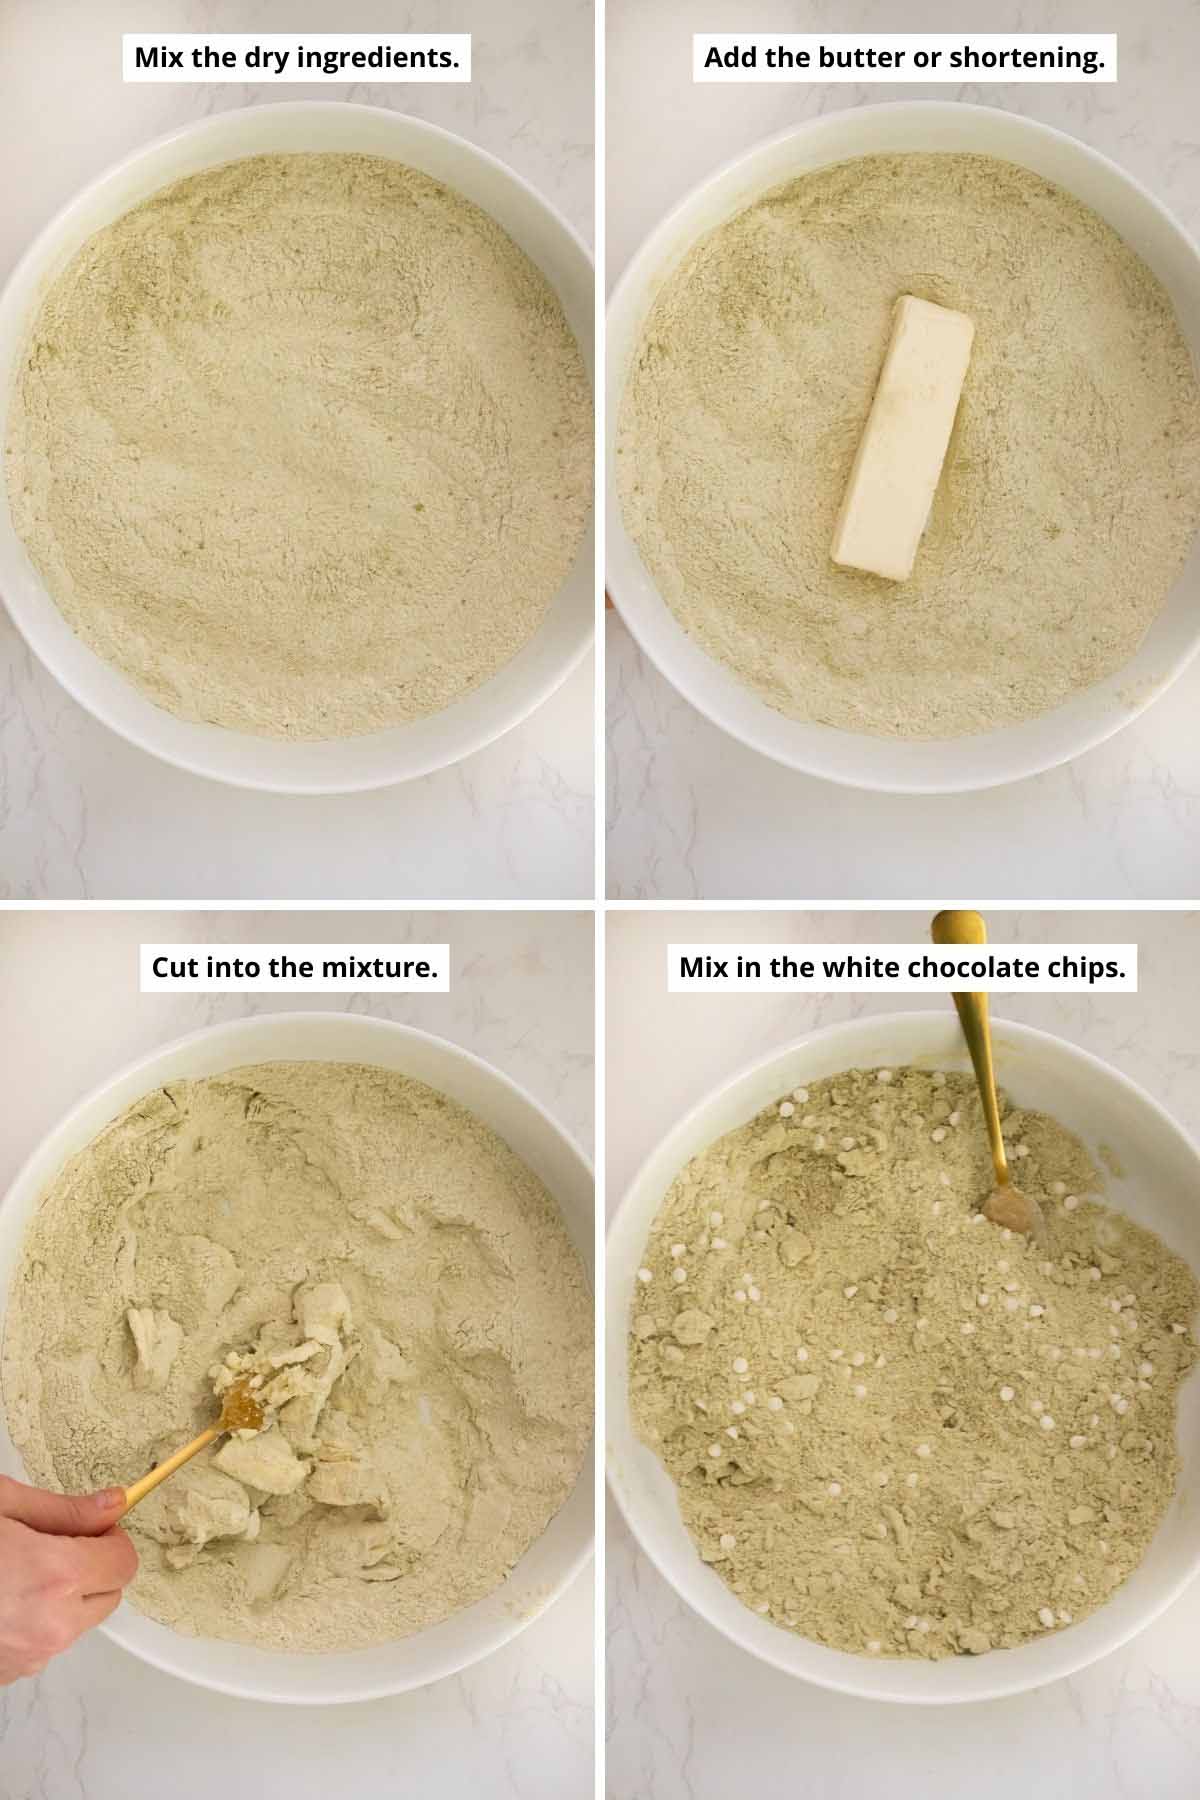 image collage showing dry ingredients, adding shortening, cutting in the shortening, and the mixture after the shortening is mixed in